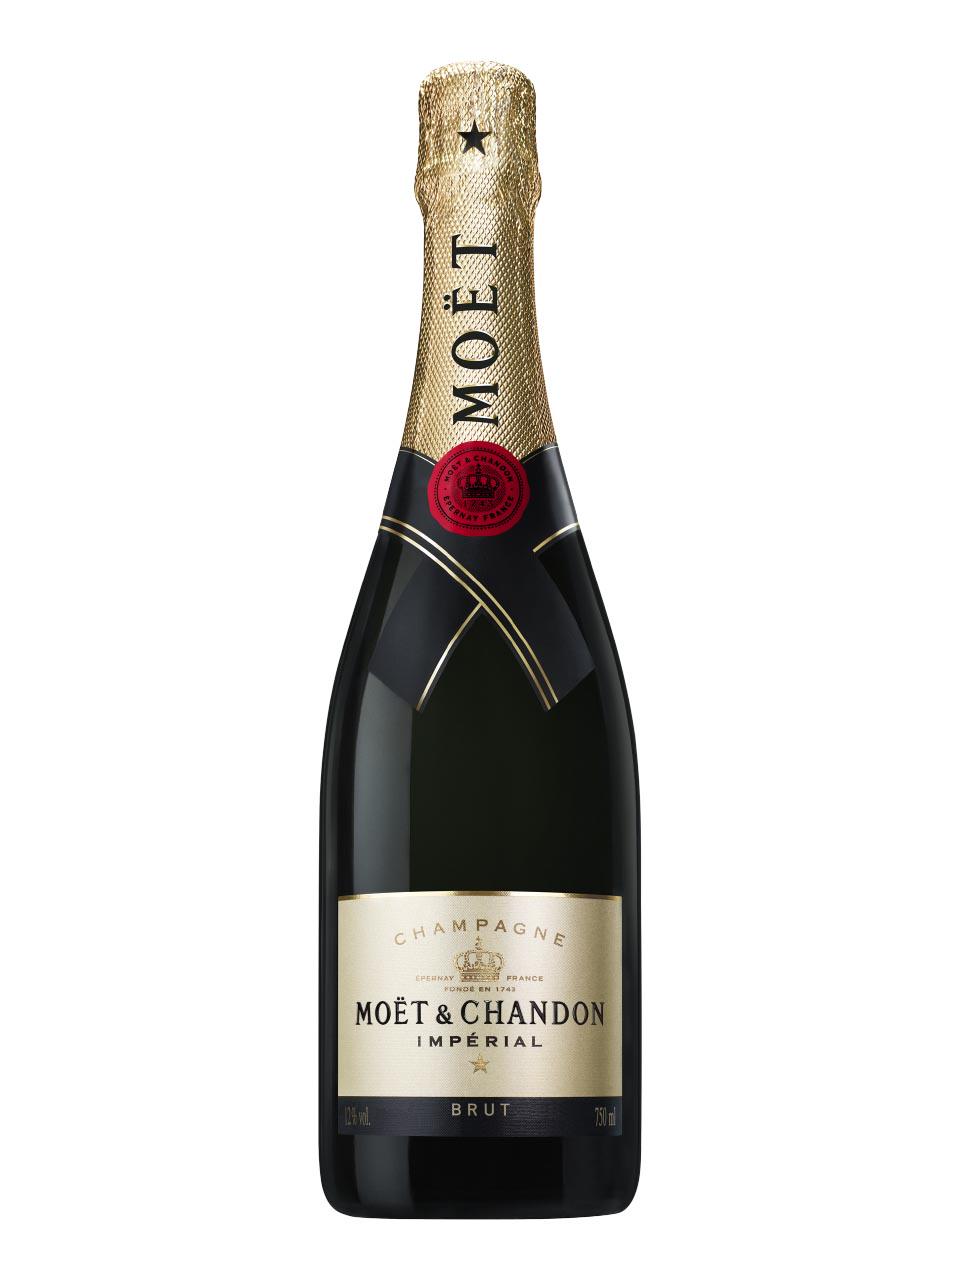 Moet & Chandon Ice Imperial Champagne [white sparkling Champagne] - $99.99  : Rio Hill Wine & Beer, Charlottesvilles premiere wine & beer retailer